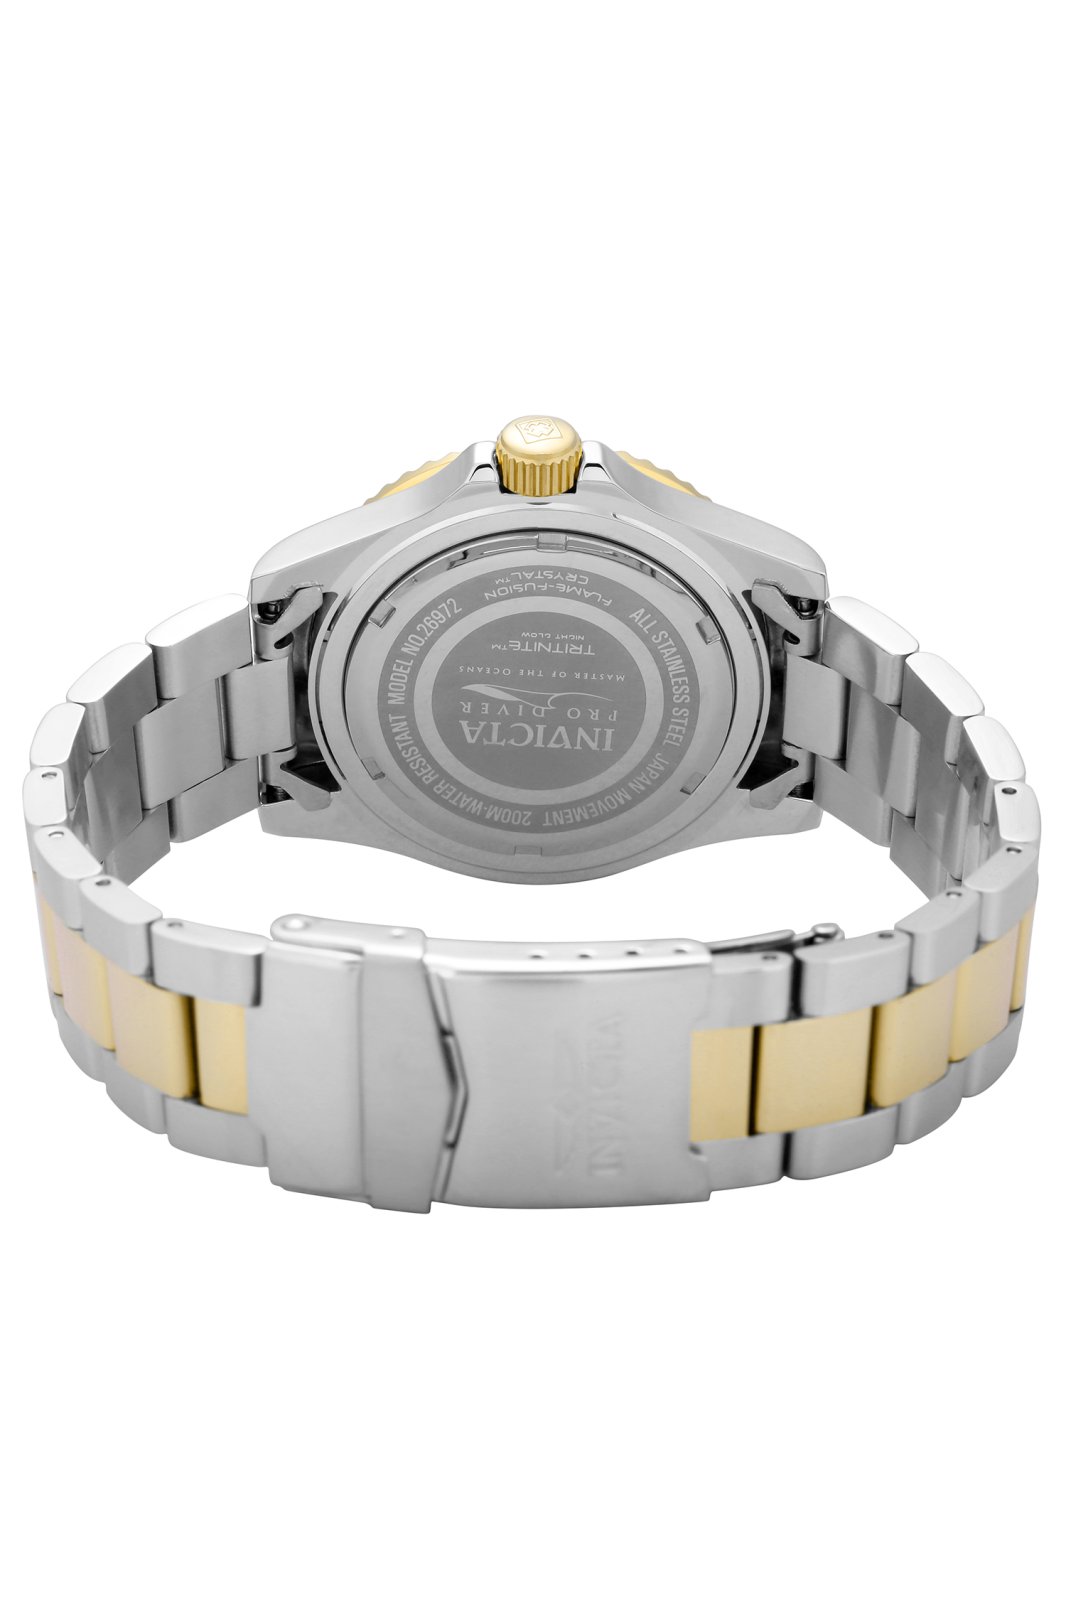  Invicta Men's Pro Diver Quartz Watch with Stainless Steel  Strap, Two Tone, 20 (Model: 26972) : Invicta: Clothing, Shoes & Jewelry